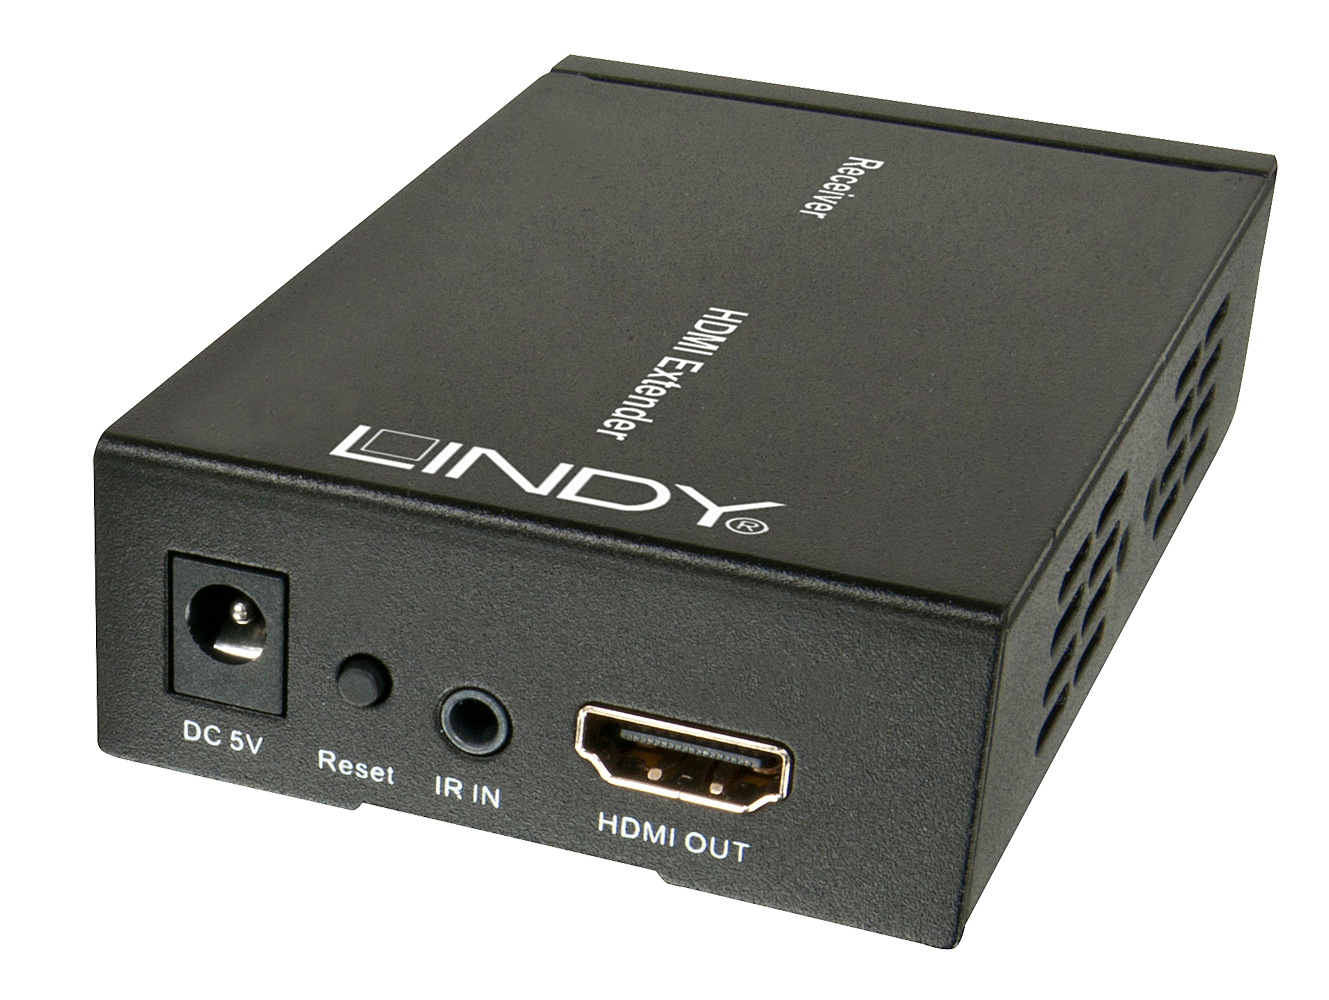 Lindy Extenders                  Hdmi + Ir Over 100base-t            Ip Receiver                         38129